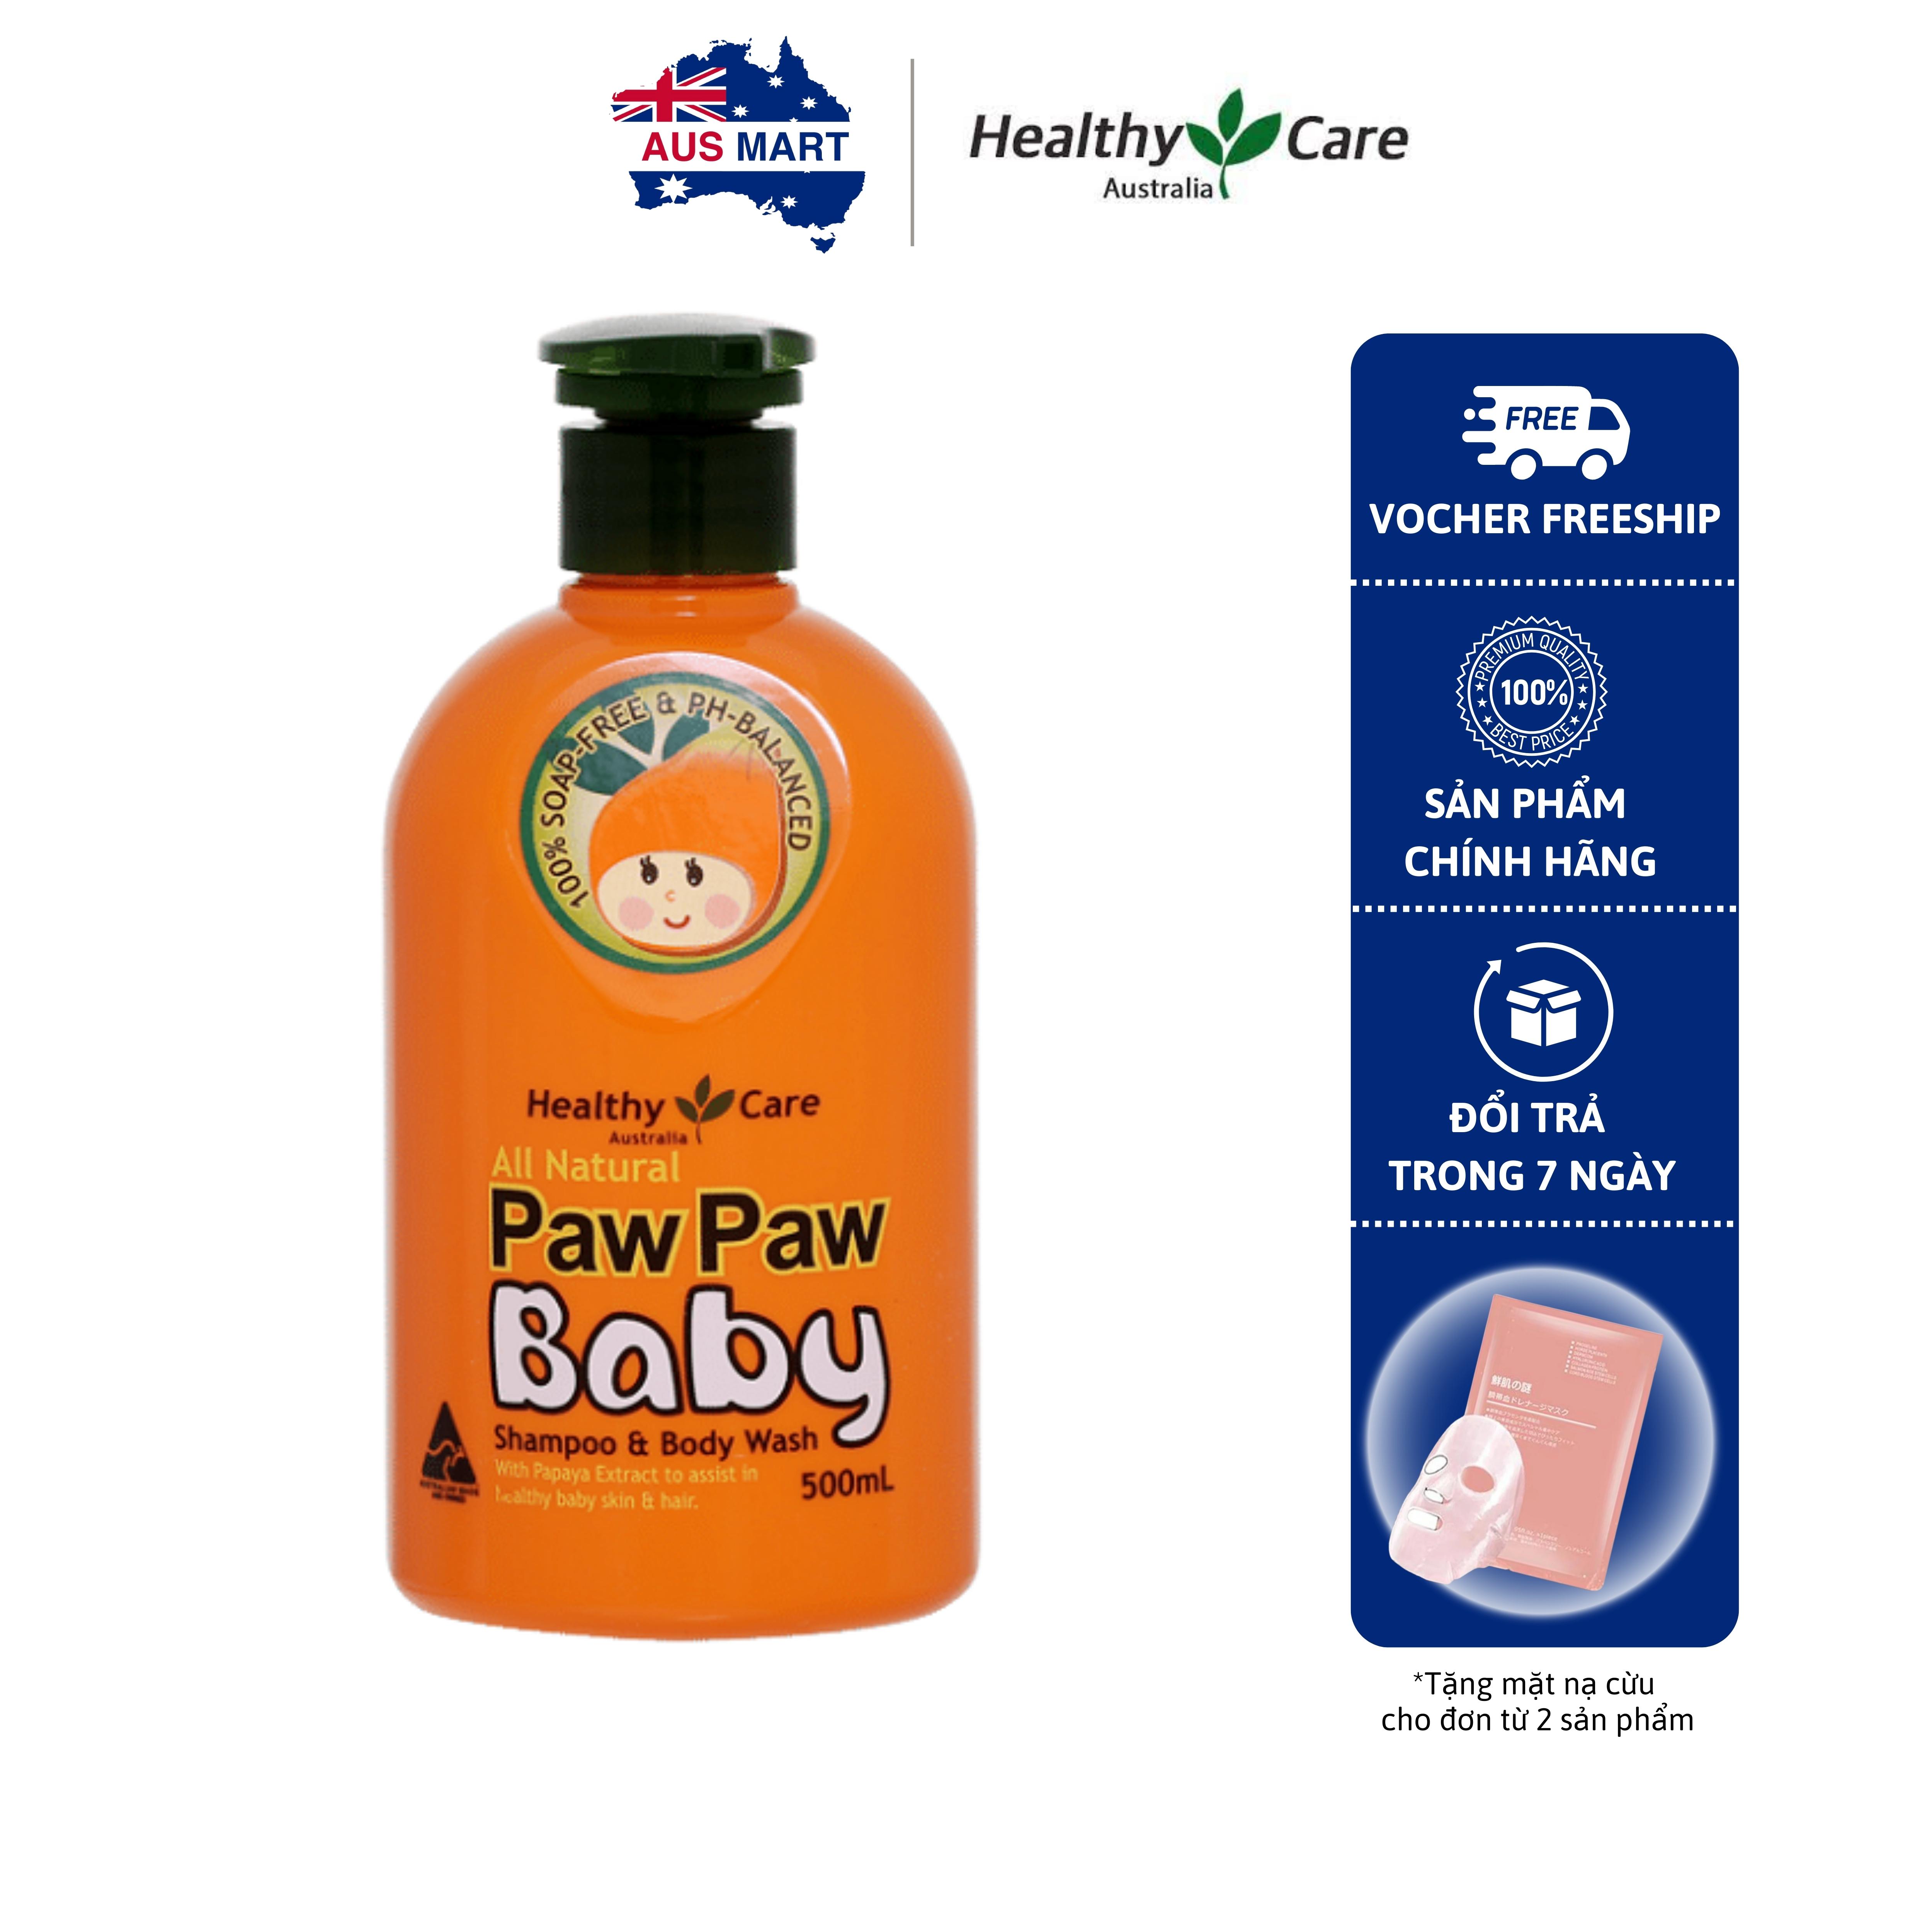 Paw Paw Baby Healthy Care Shampoo, Australia 500ml Safe, Gentle for Baby